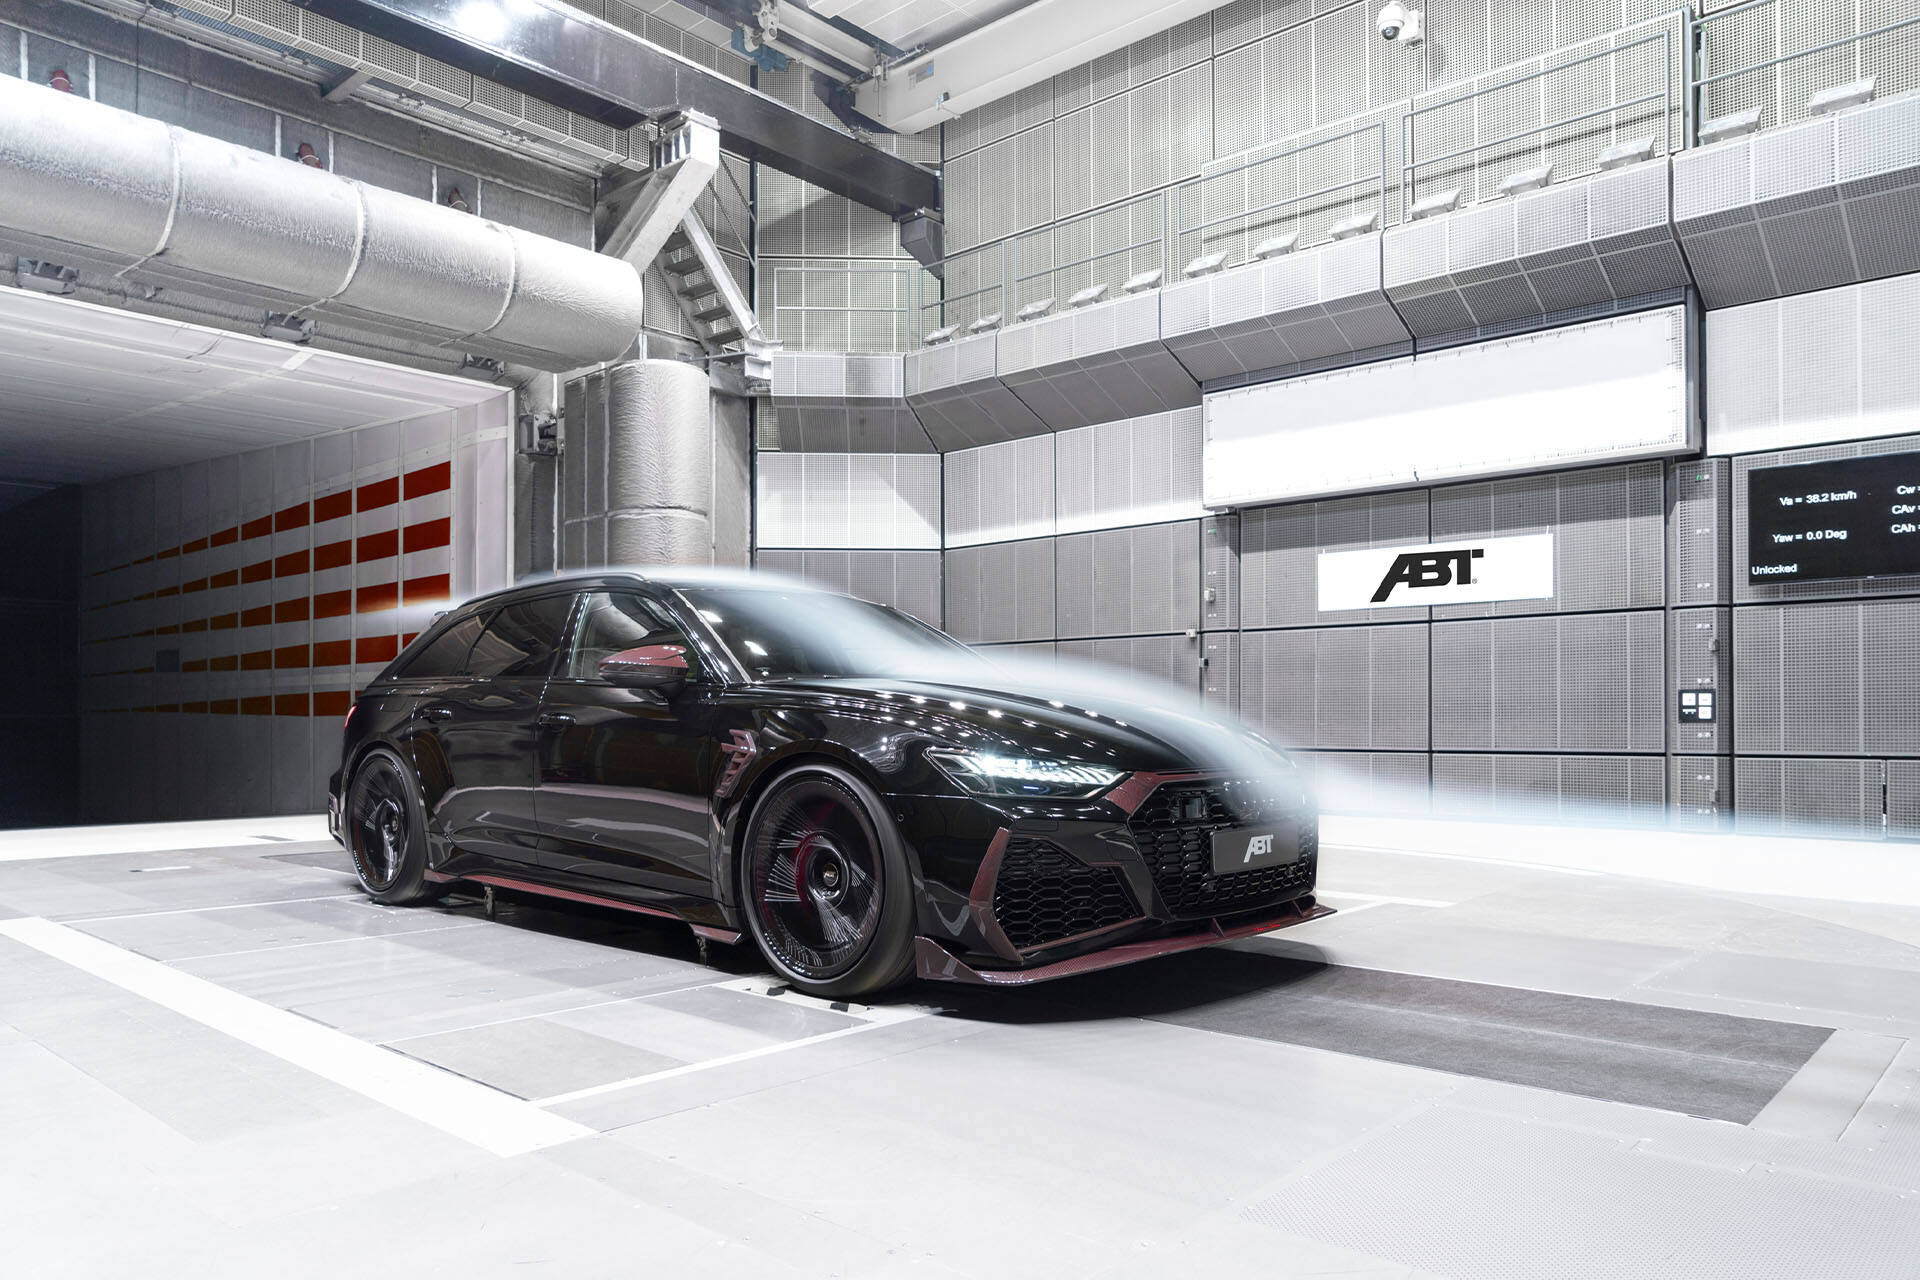 ABT congratulates Audi on 20 years of the RS 6 Perfect platform for  ultimate high-performance station wagons - Audi Tuning, VW Tuning,  Chiptuning von ABT Sportsline.